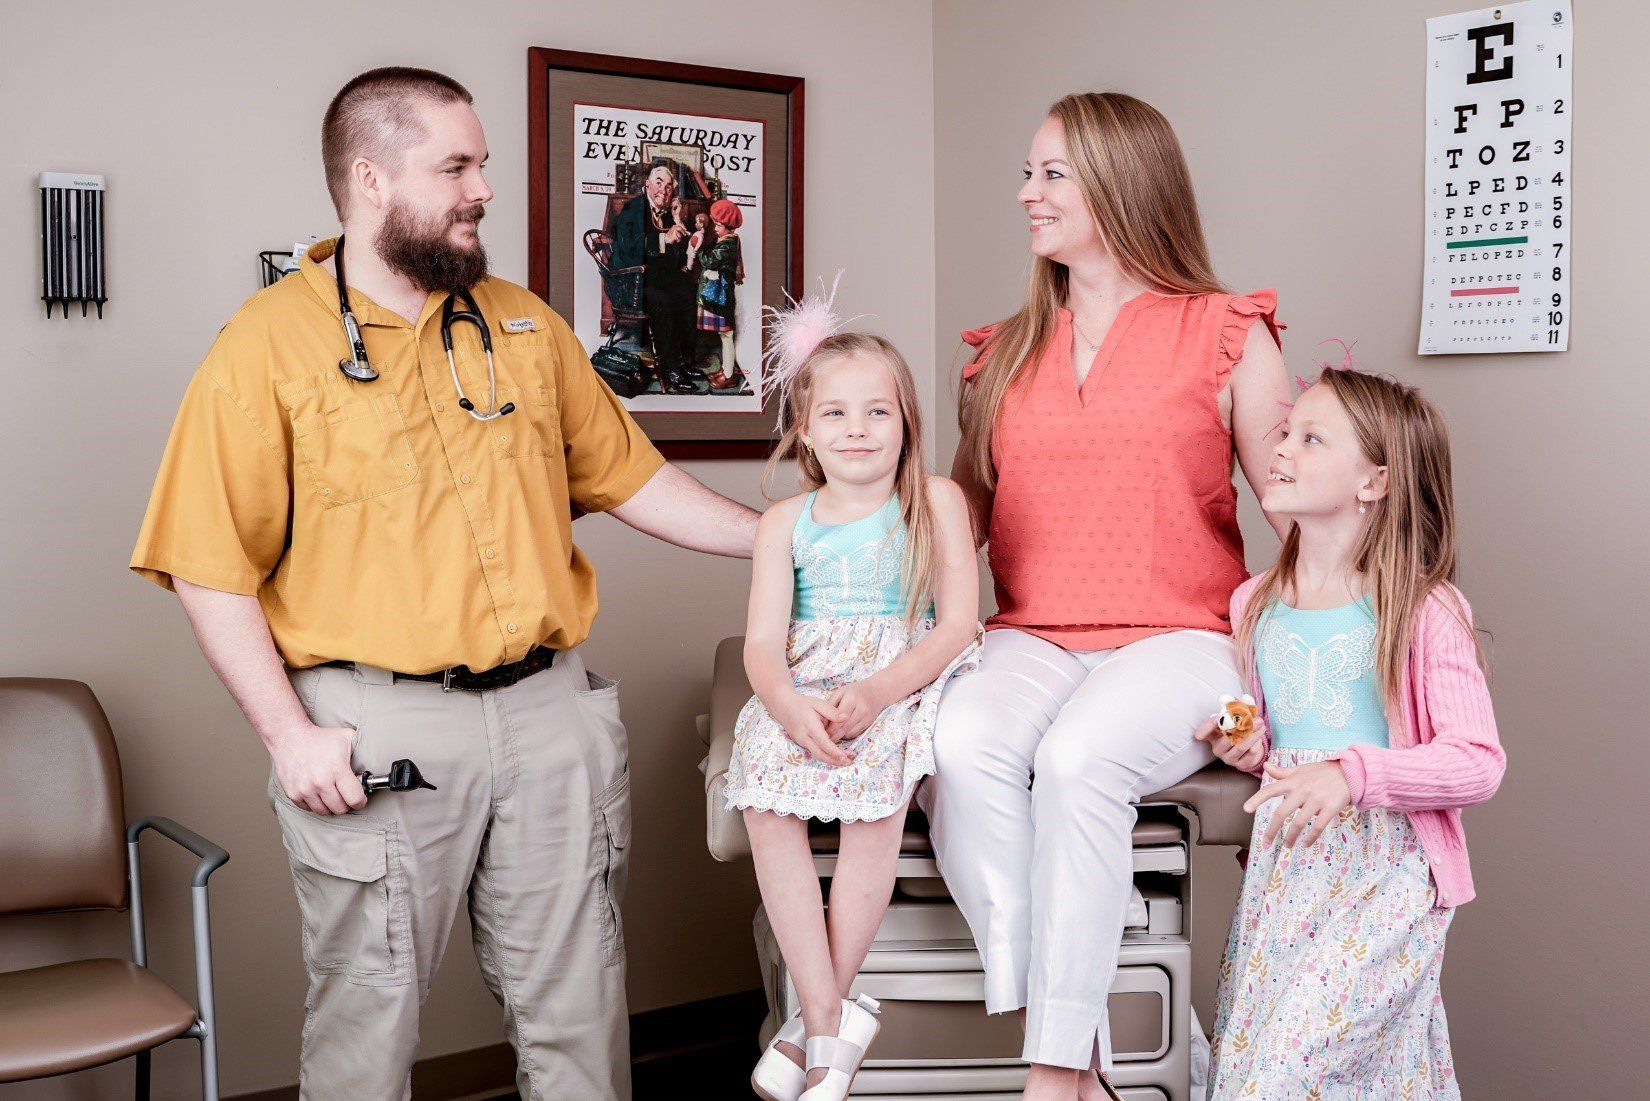 Primary Care Physician — Paragould, AR — Paragould Family Care